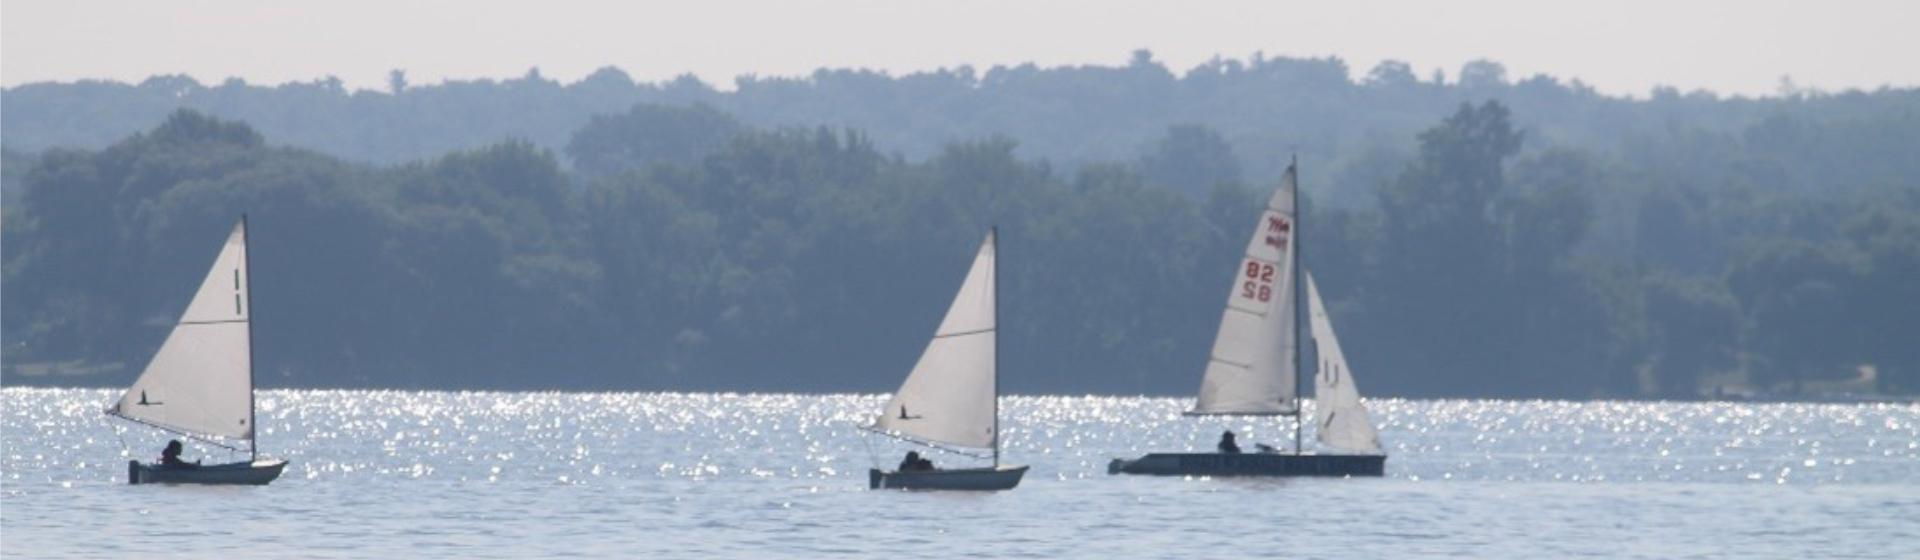 Three sailboats on the Bay of Quinte.